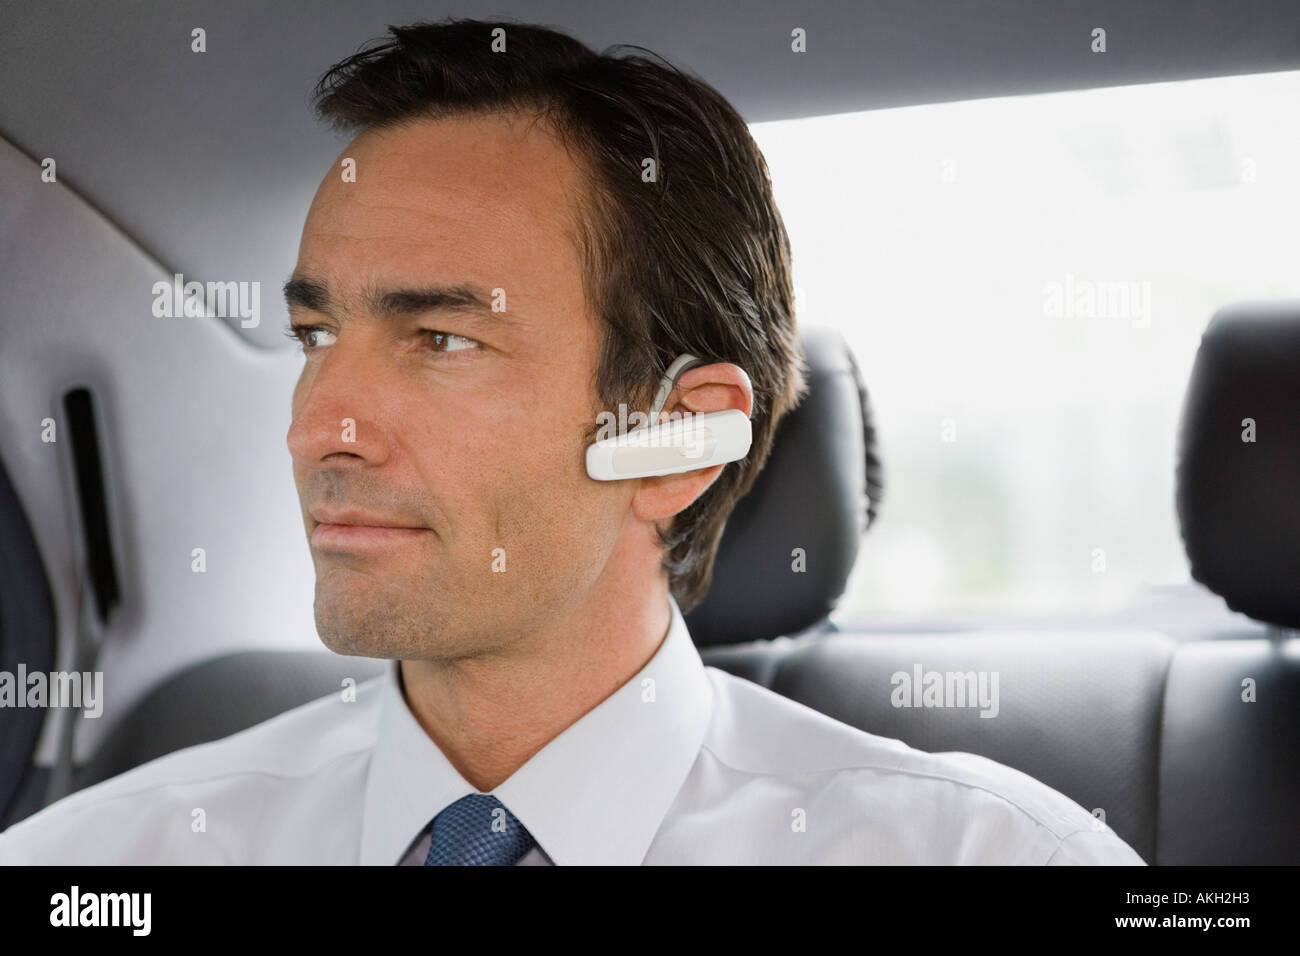 Businessman with bluetooth headset sitting in car Stock Photo